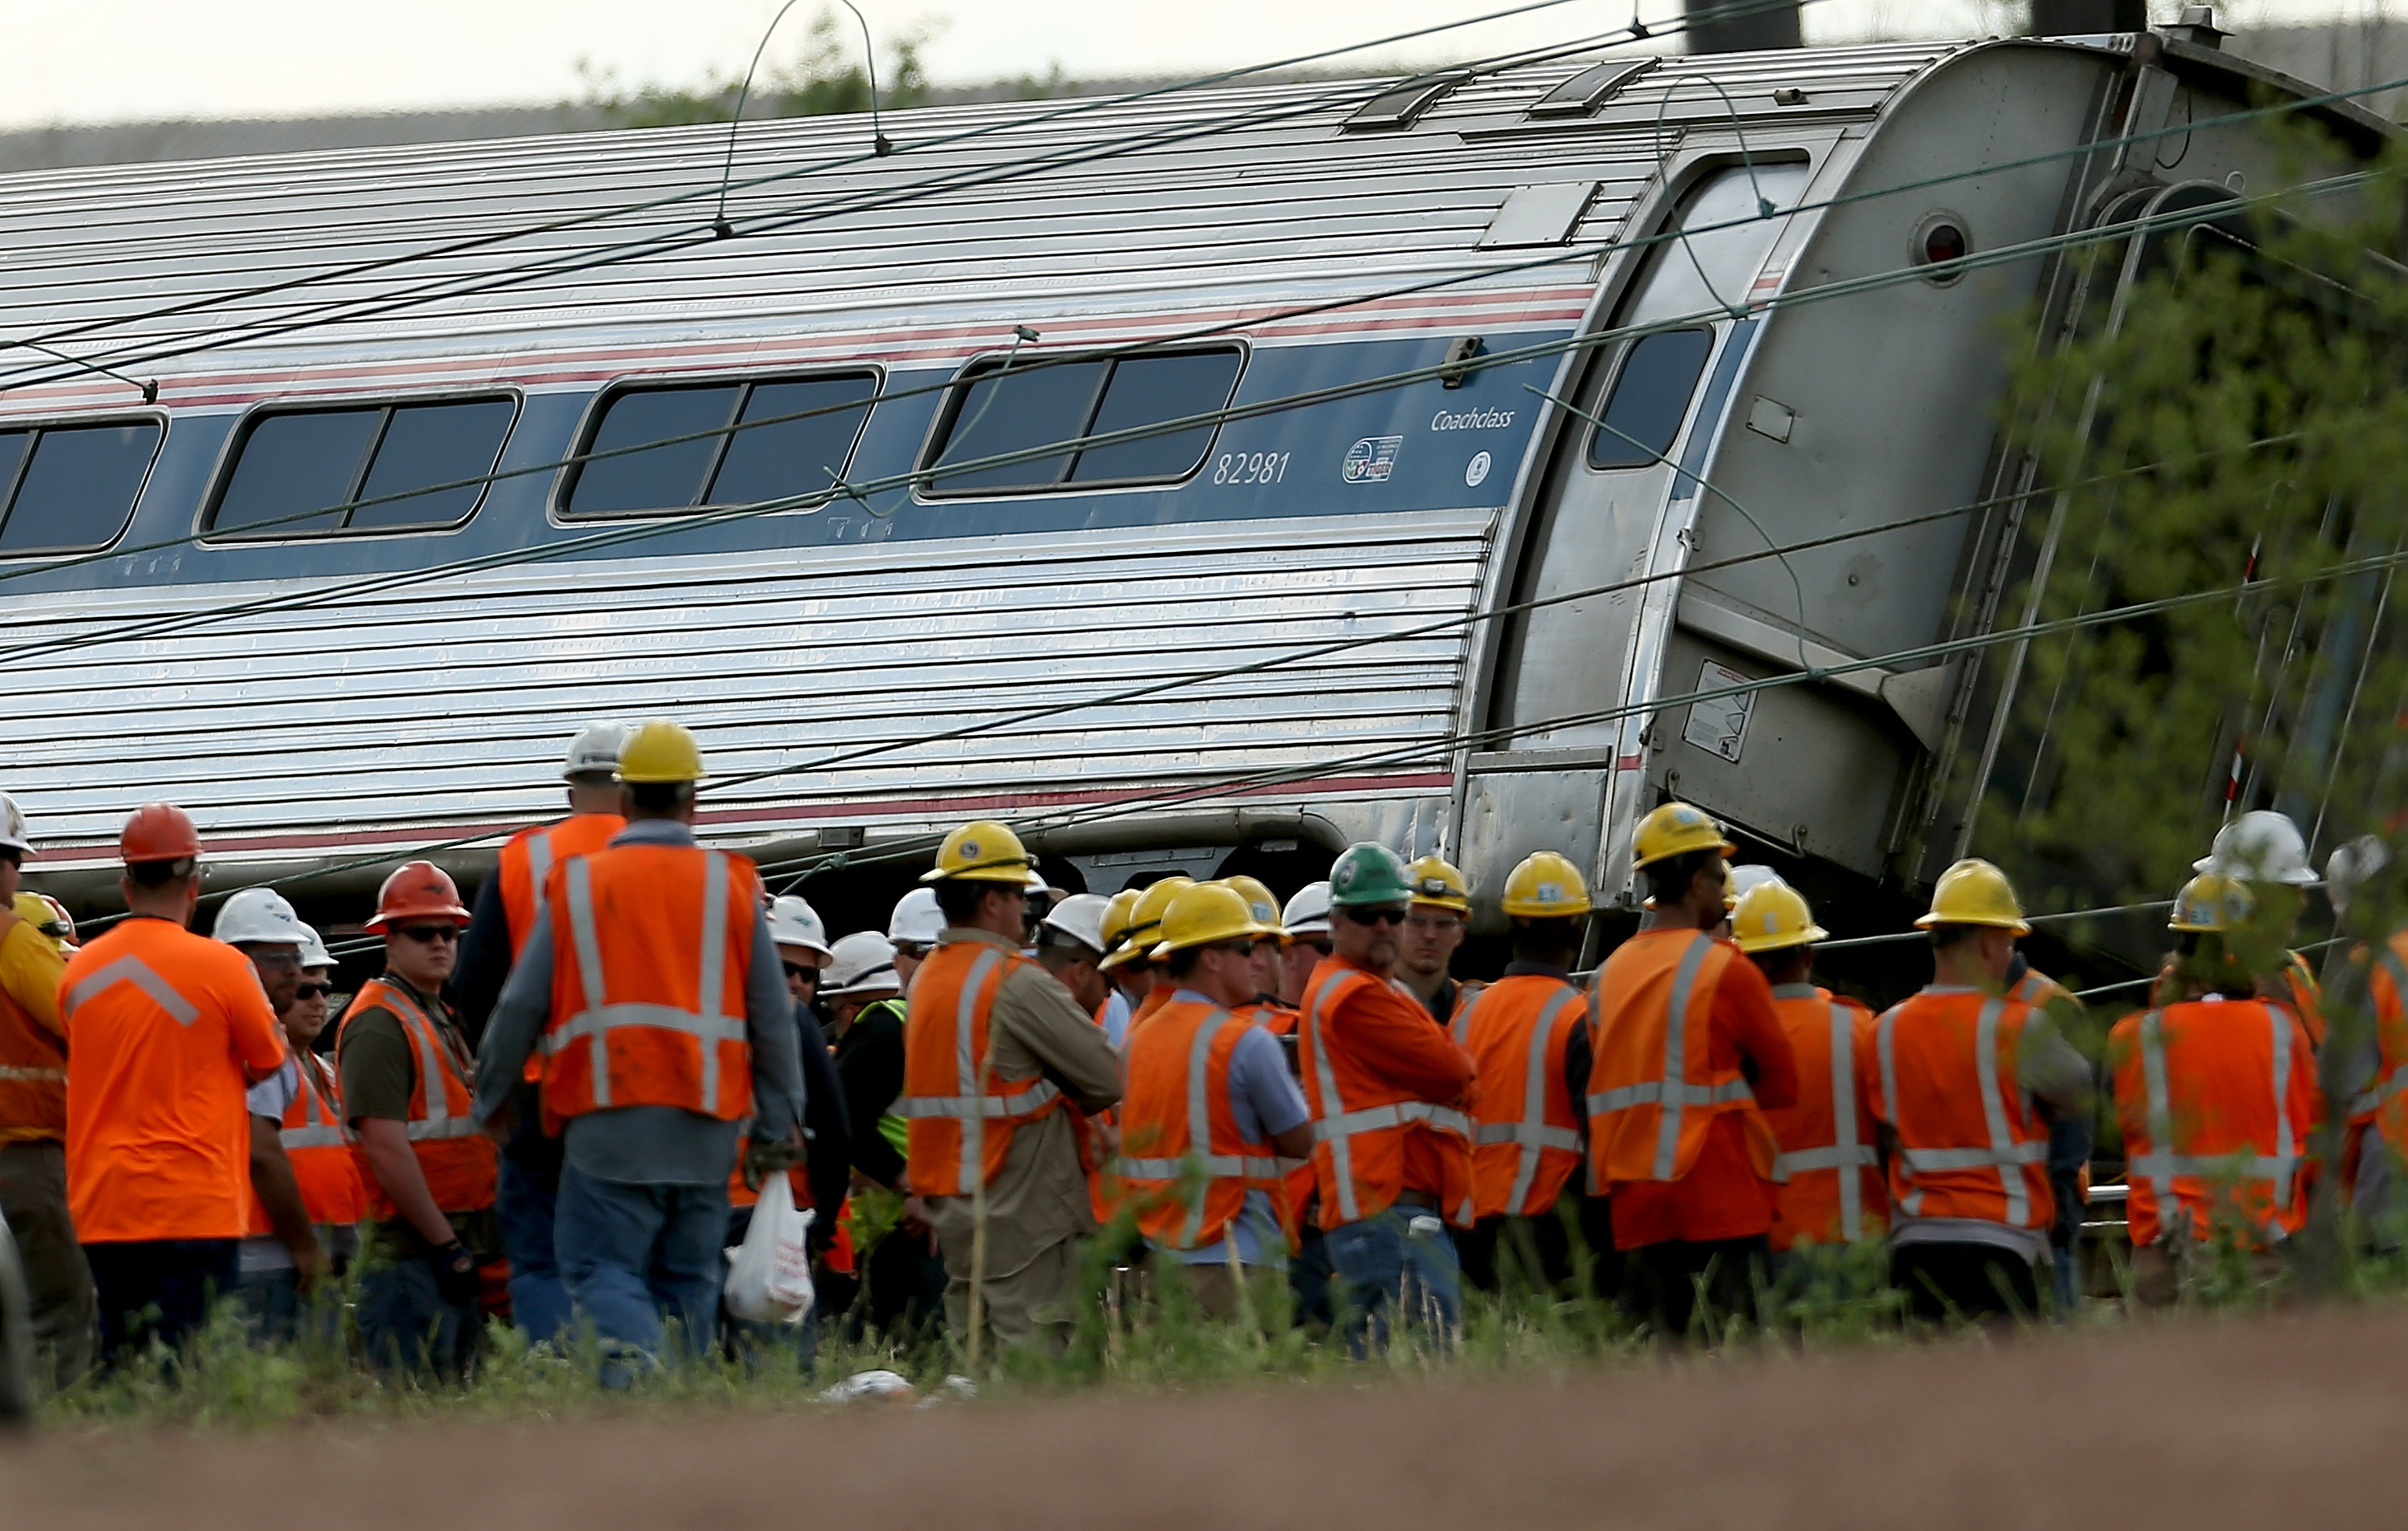 More Than a Dozen Trains Have Derailed in the U.S. This Year